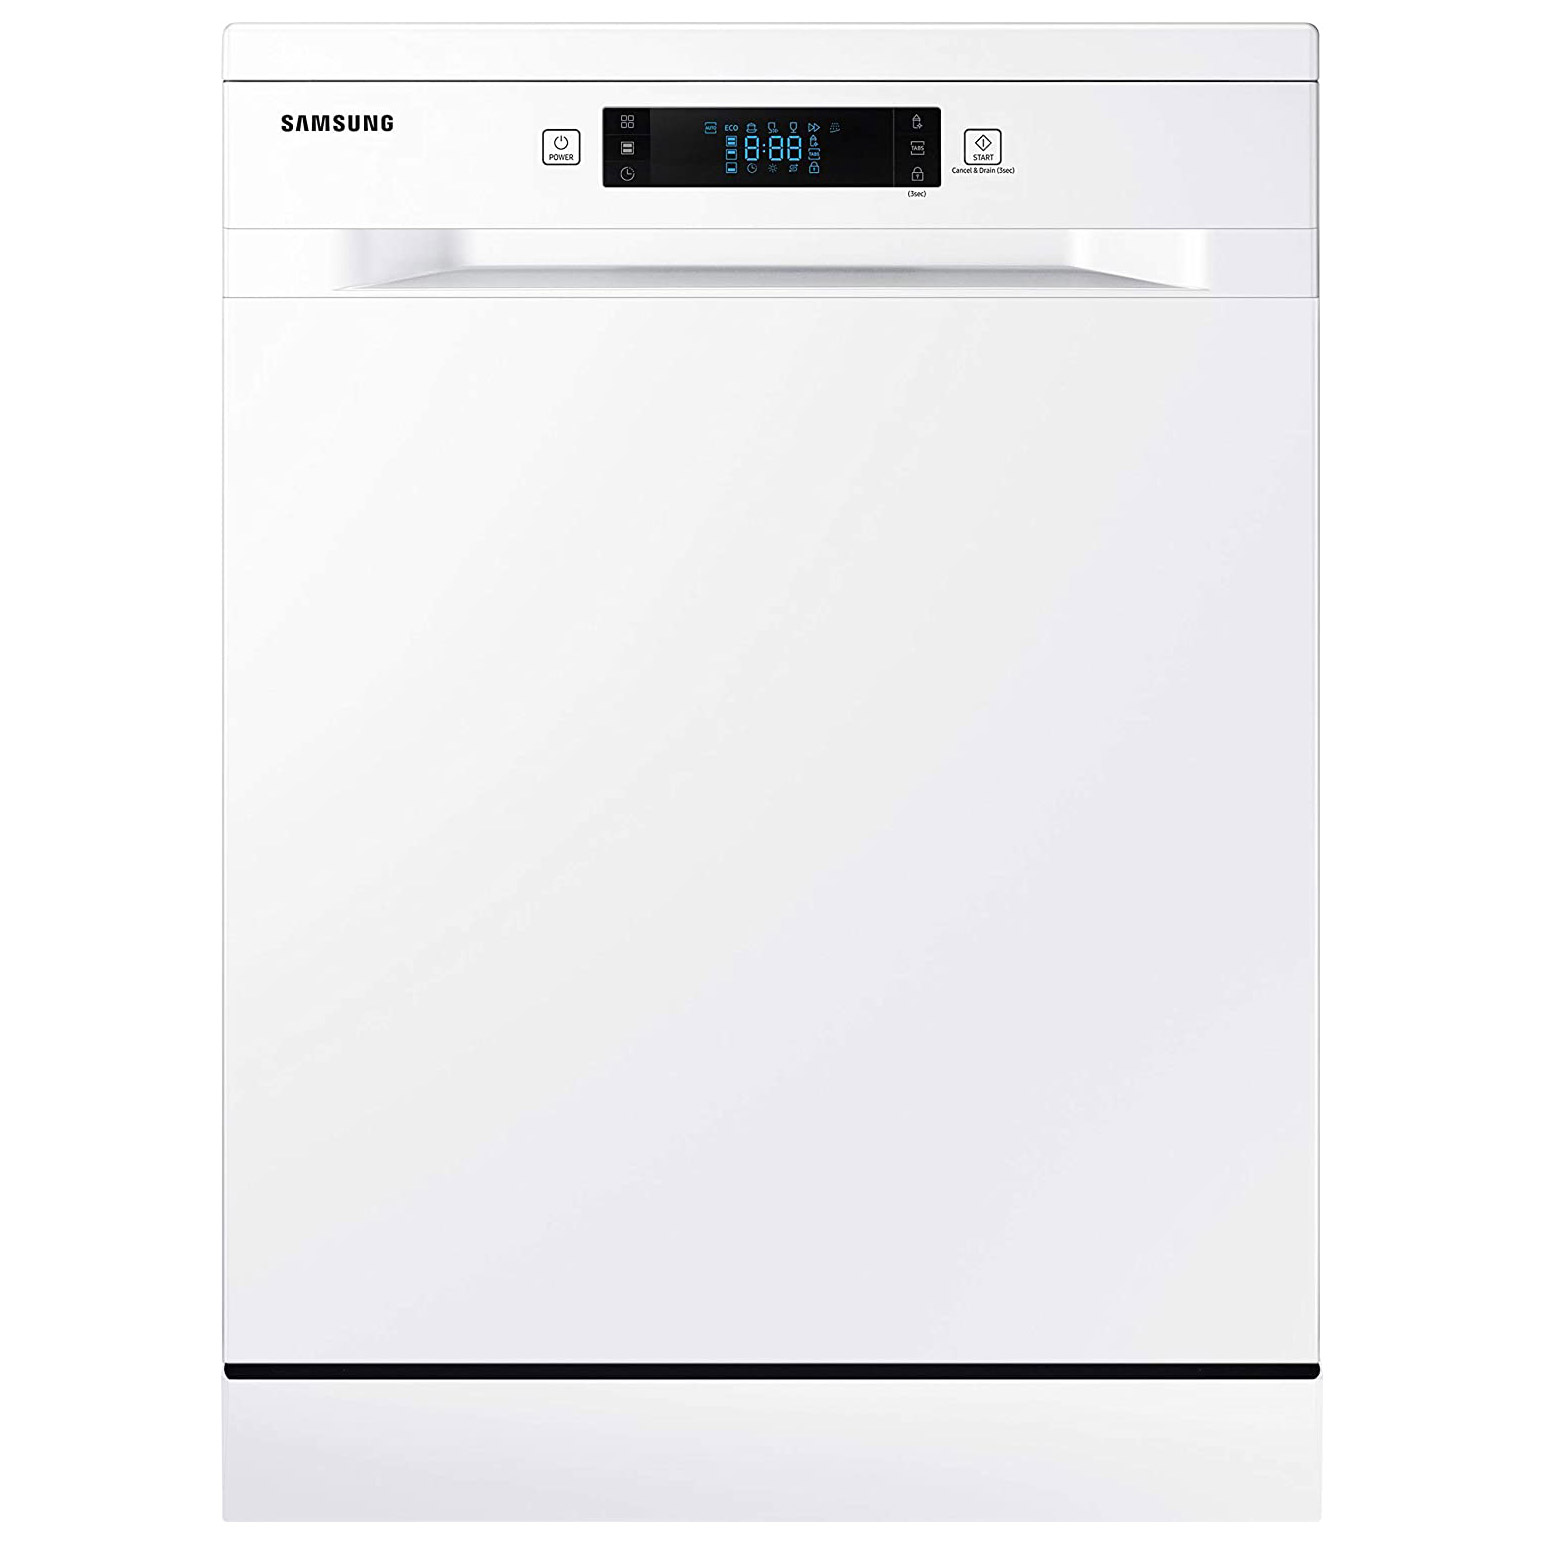 Image of Samsung DW60M6050FW 60cm Dishwasher in White 14 Place Setting E Rated